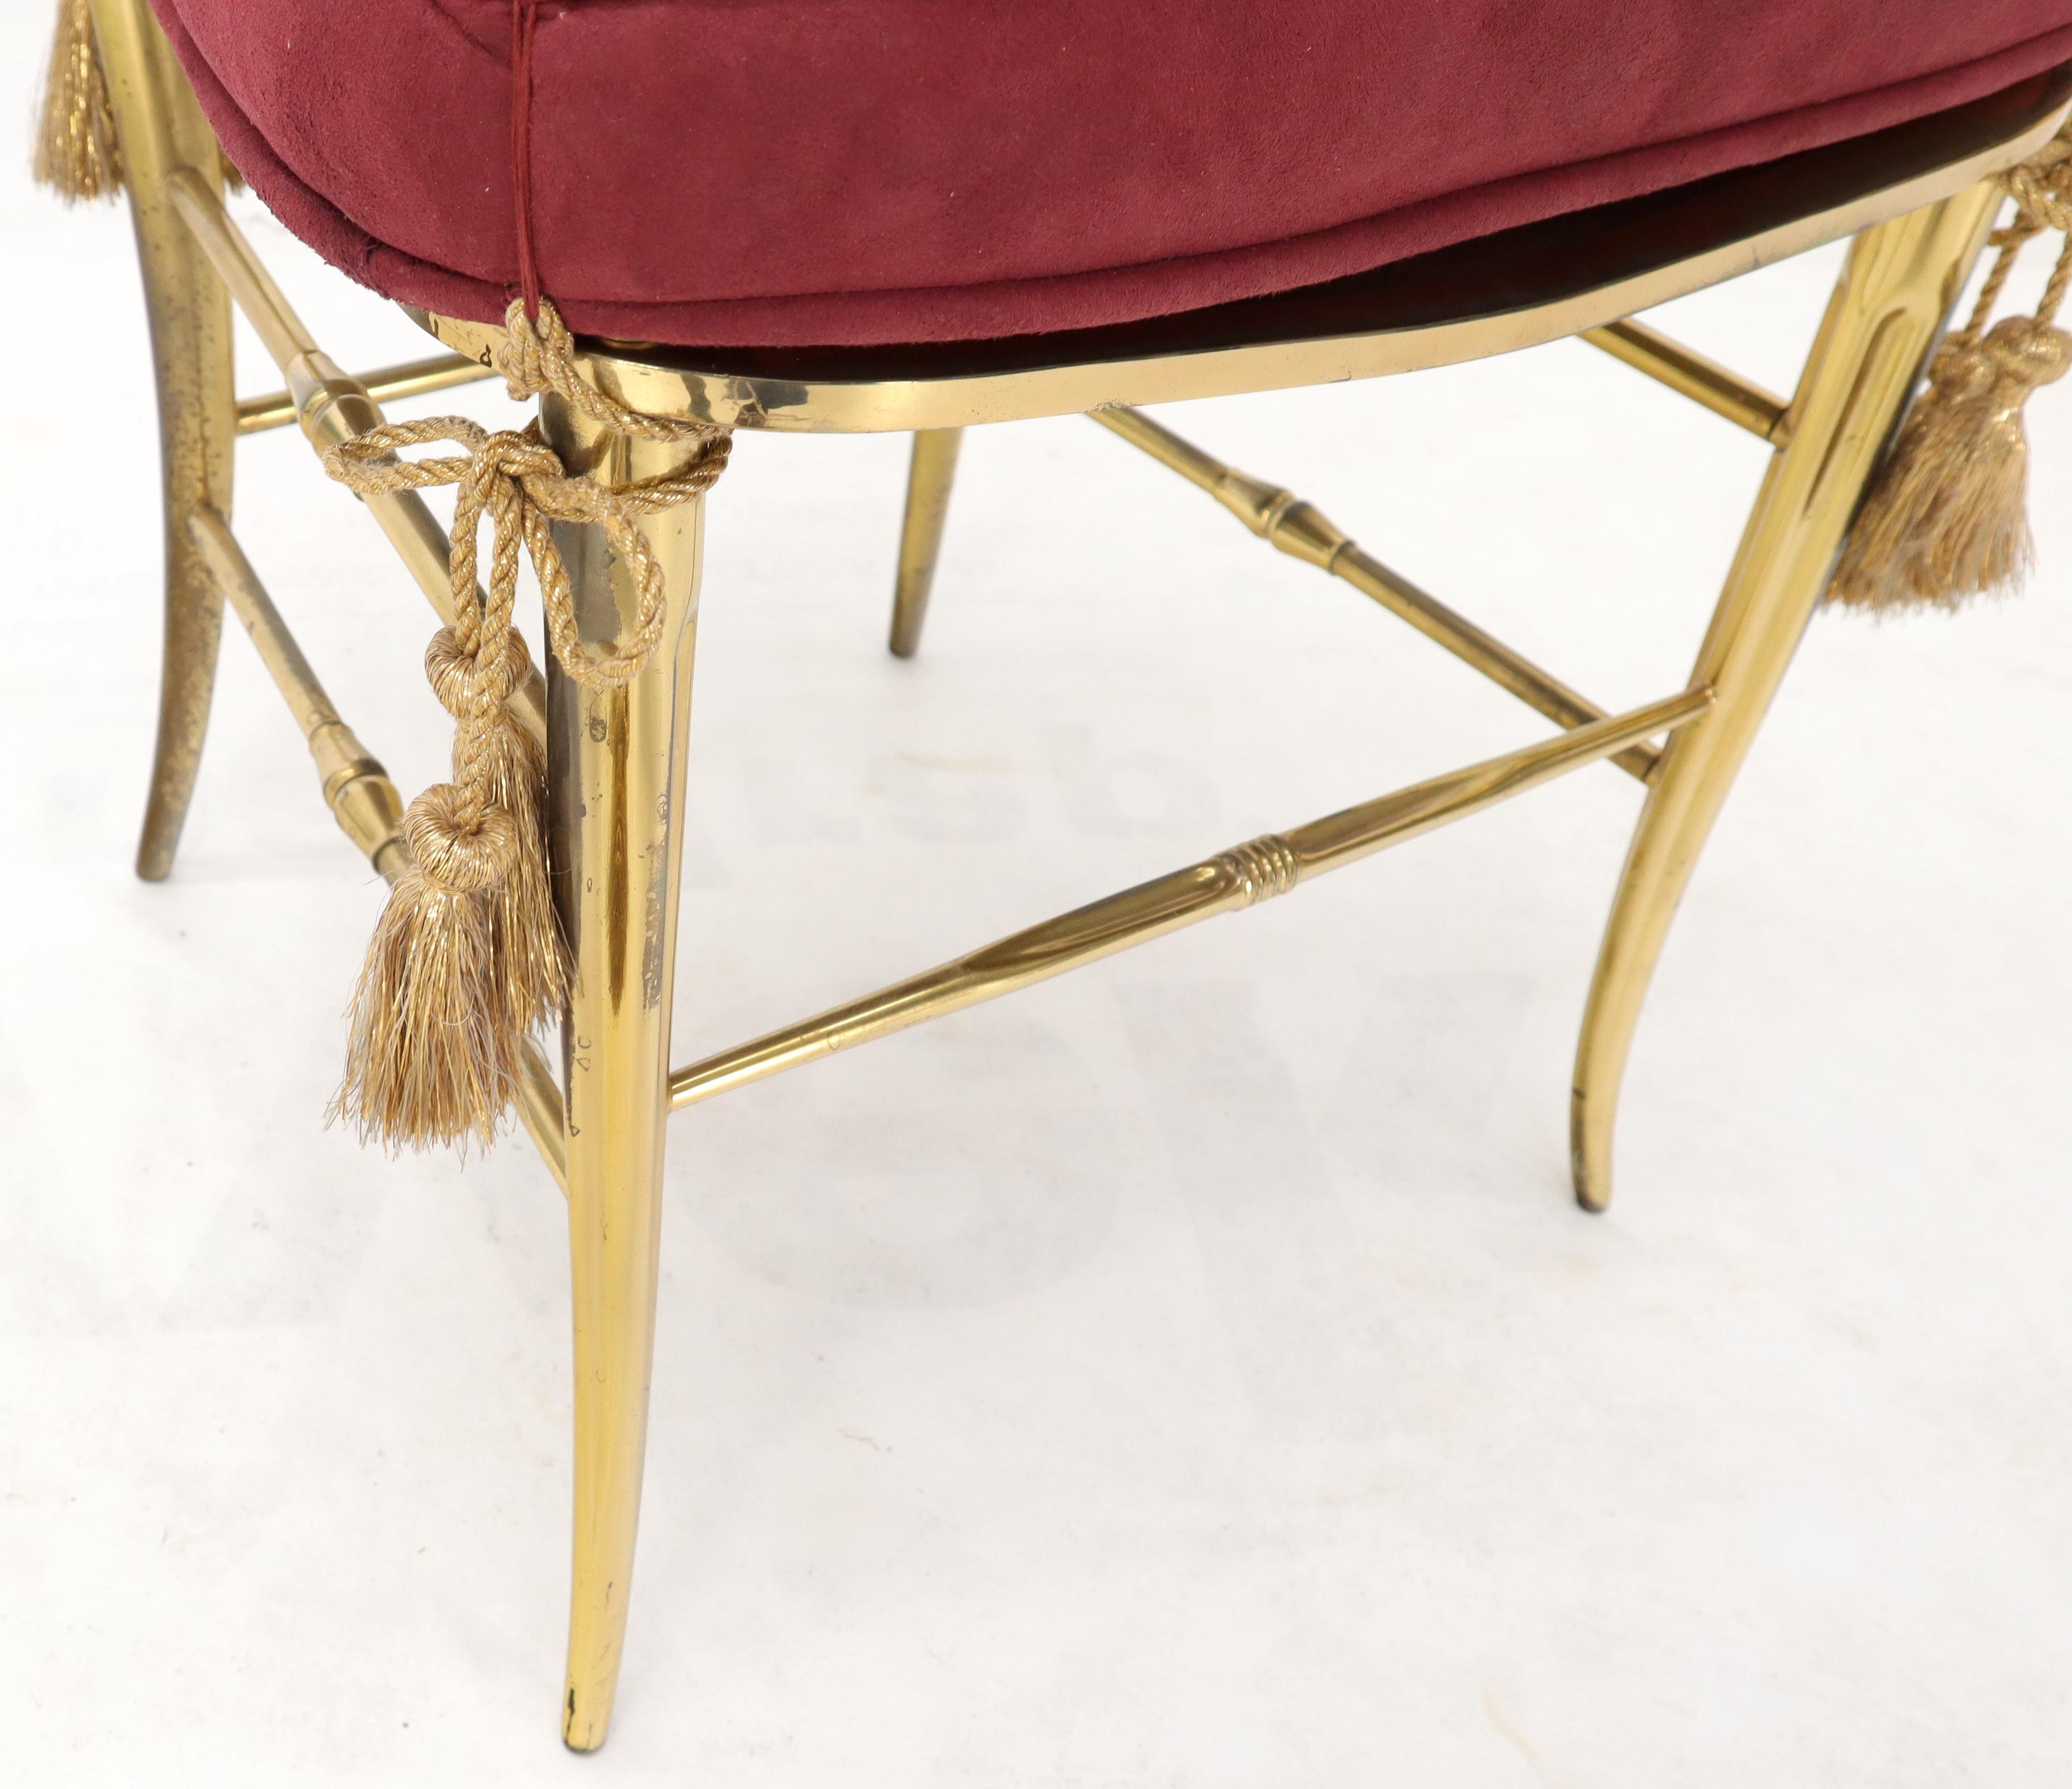 Set of 2 Italian Solid Brass Chiavari Chairs from 1950s Salmon Red Upholstery For Sale 1